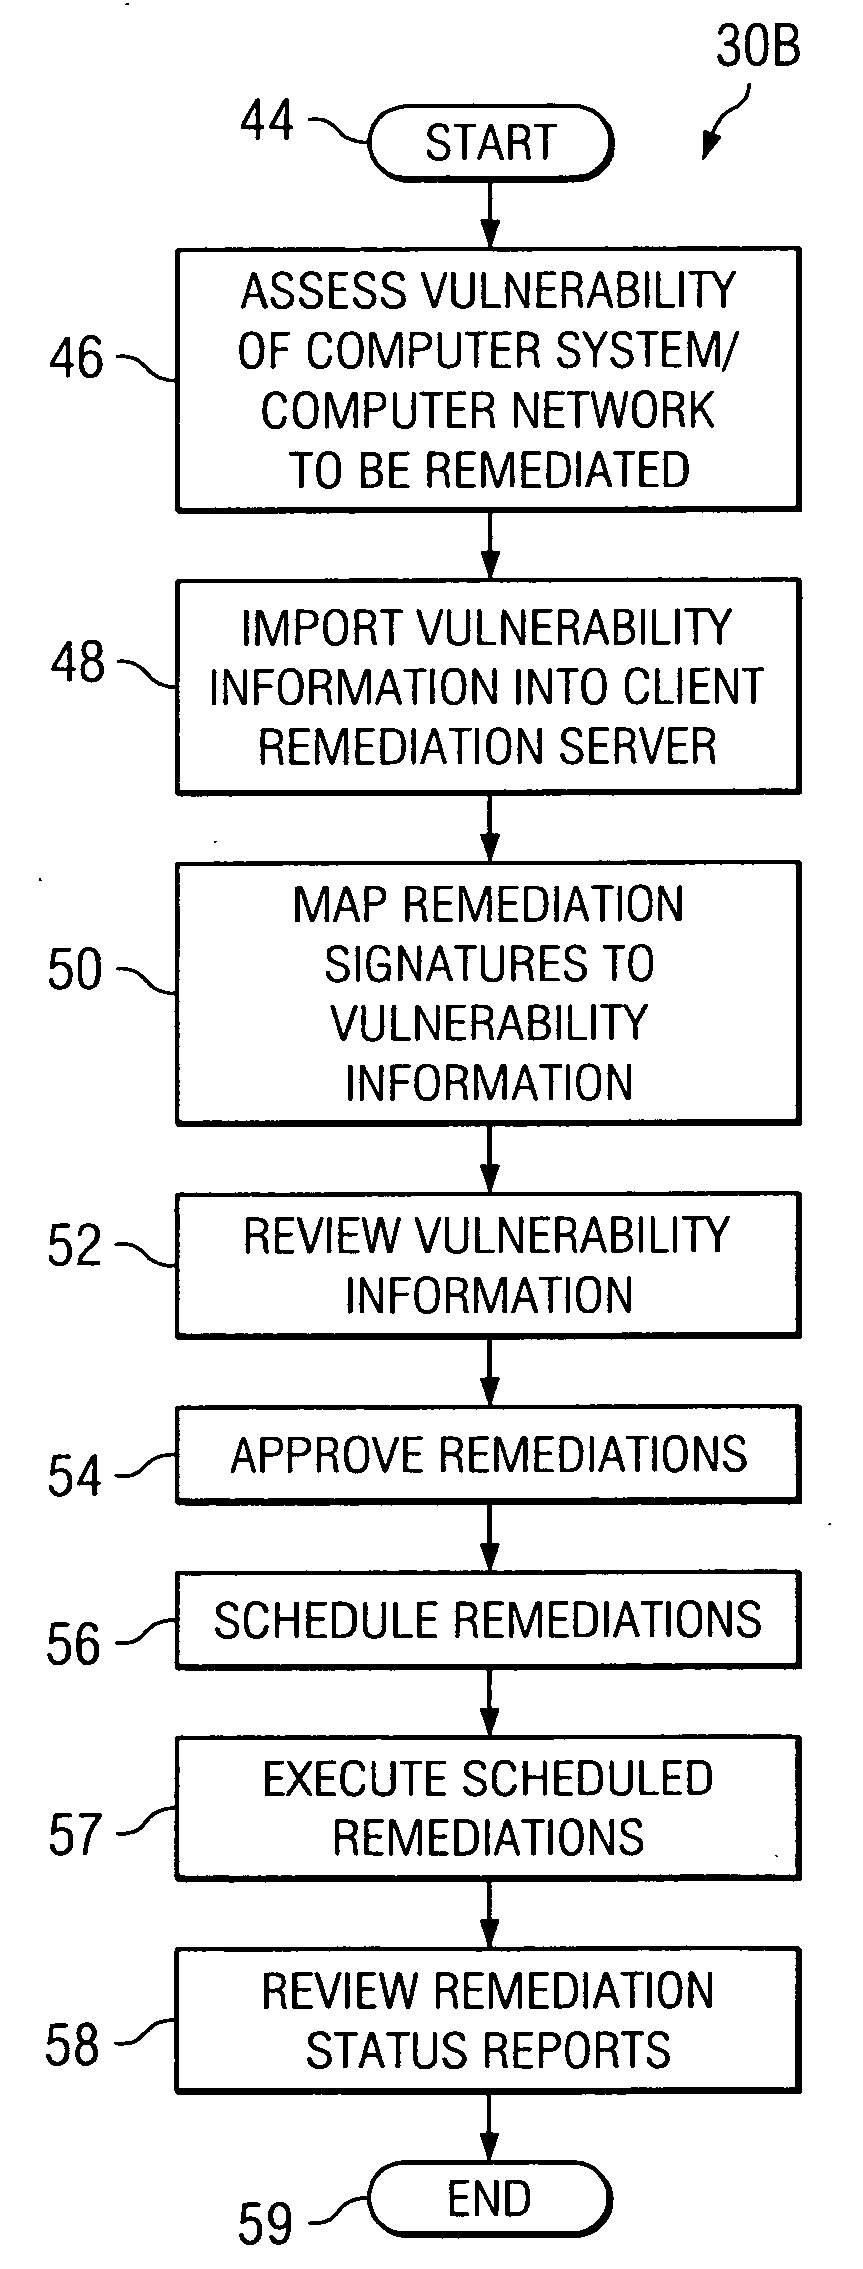 Inventory management-based computer vulnerability resolution system